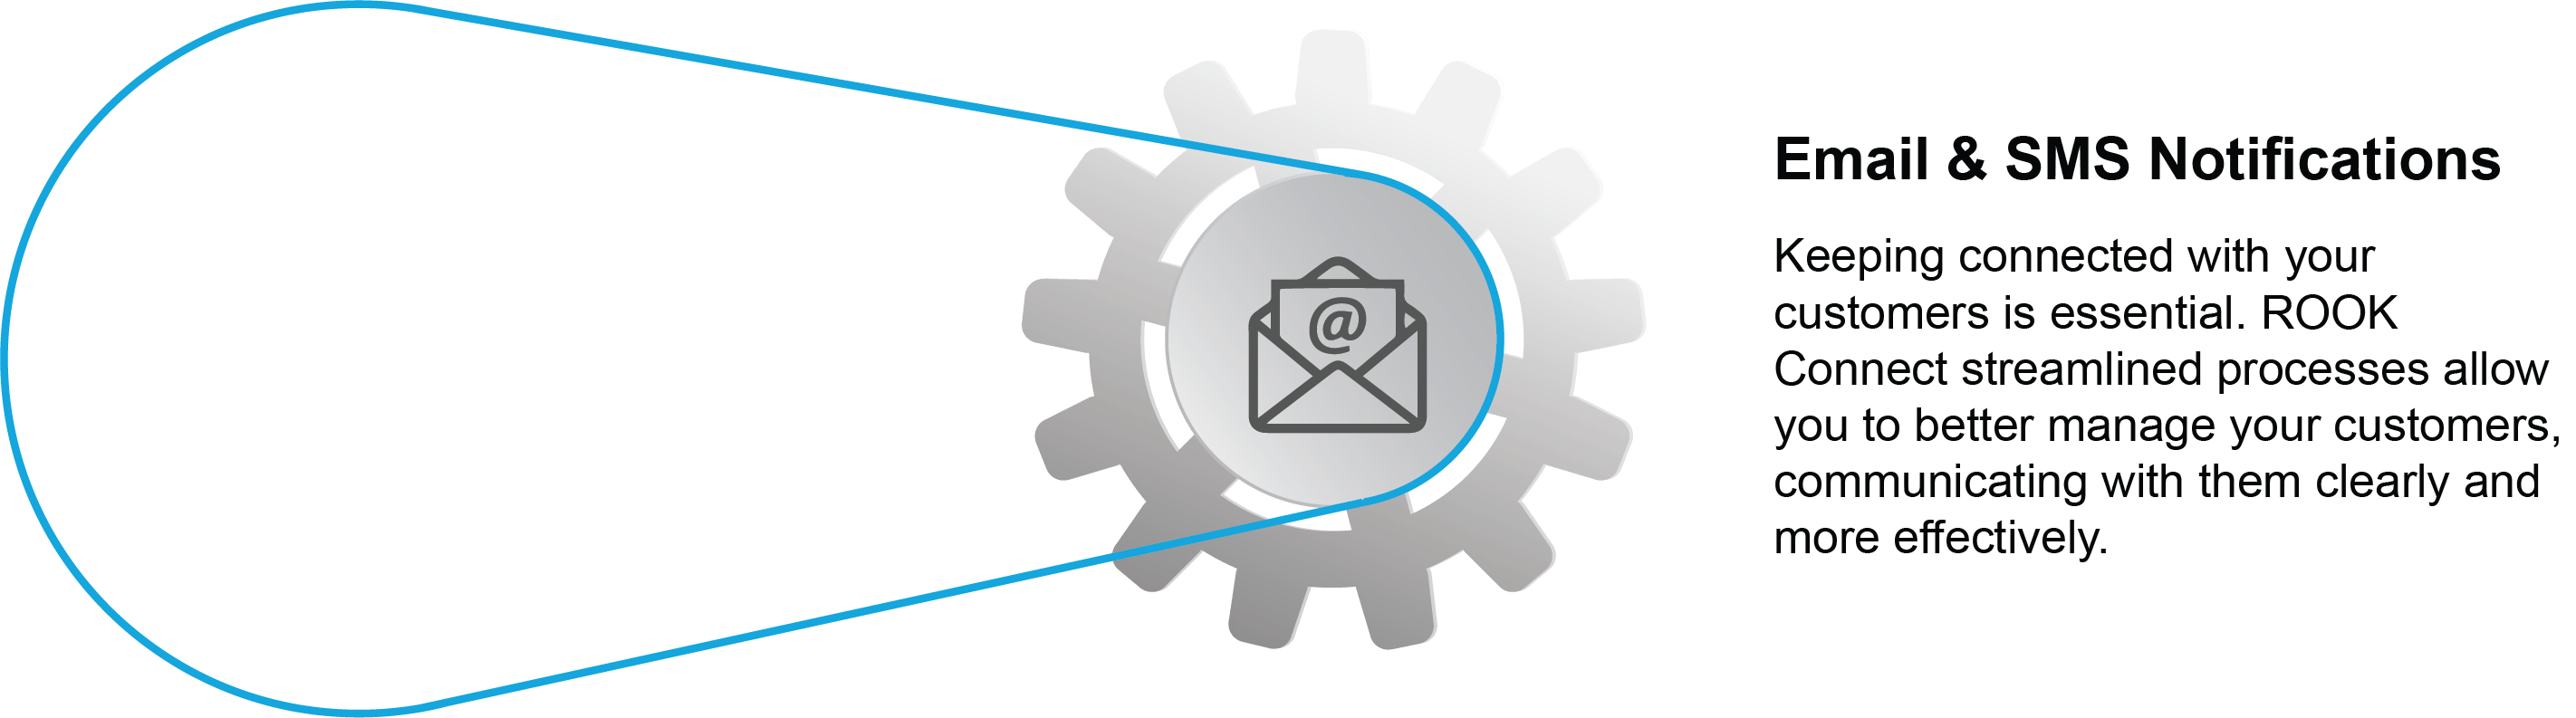 Email & SMS Notifications